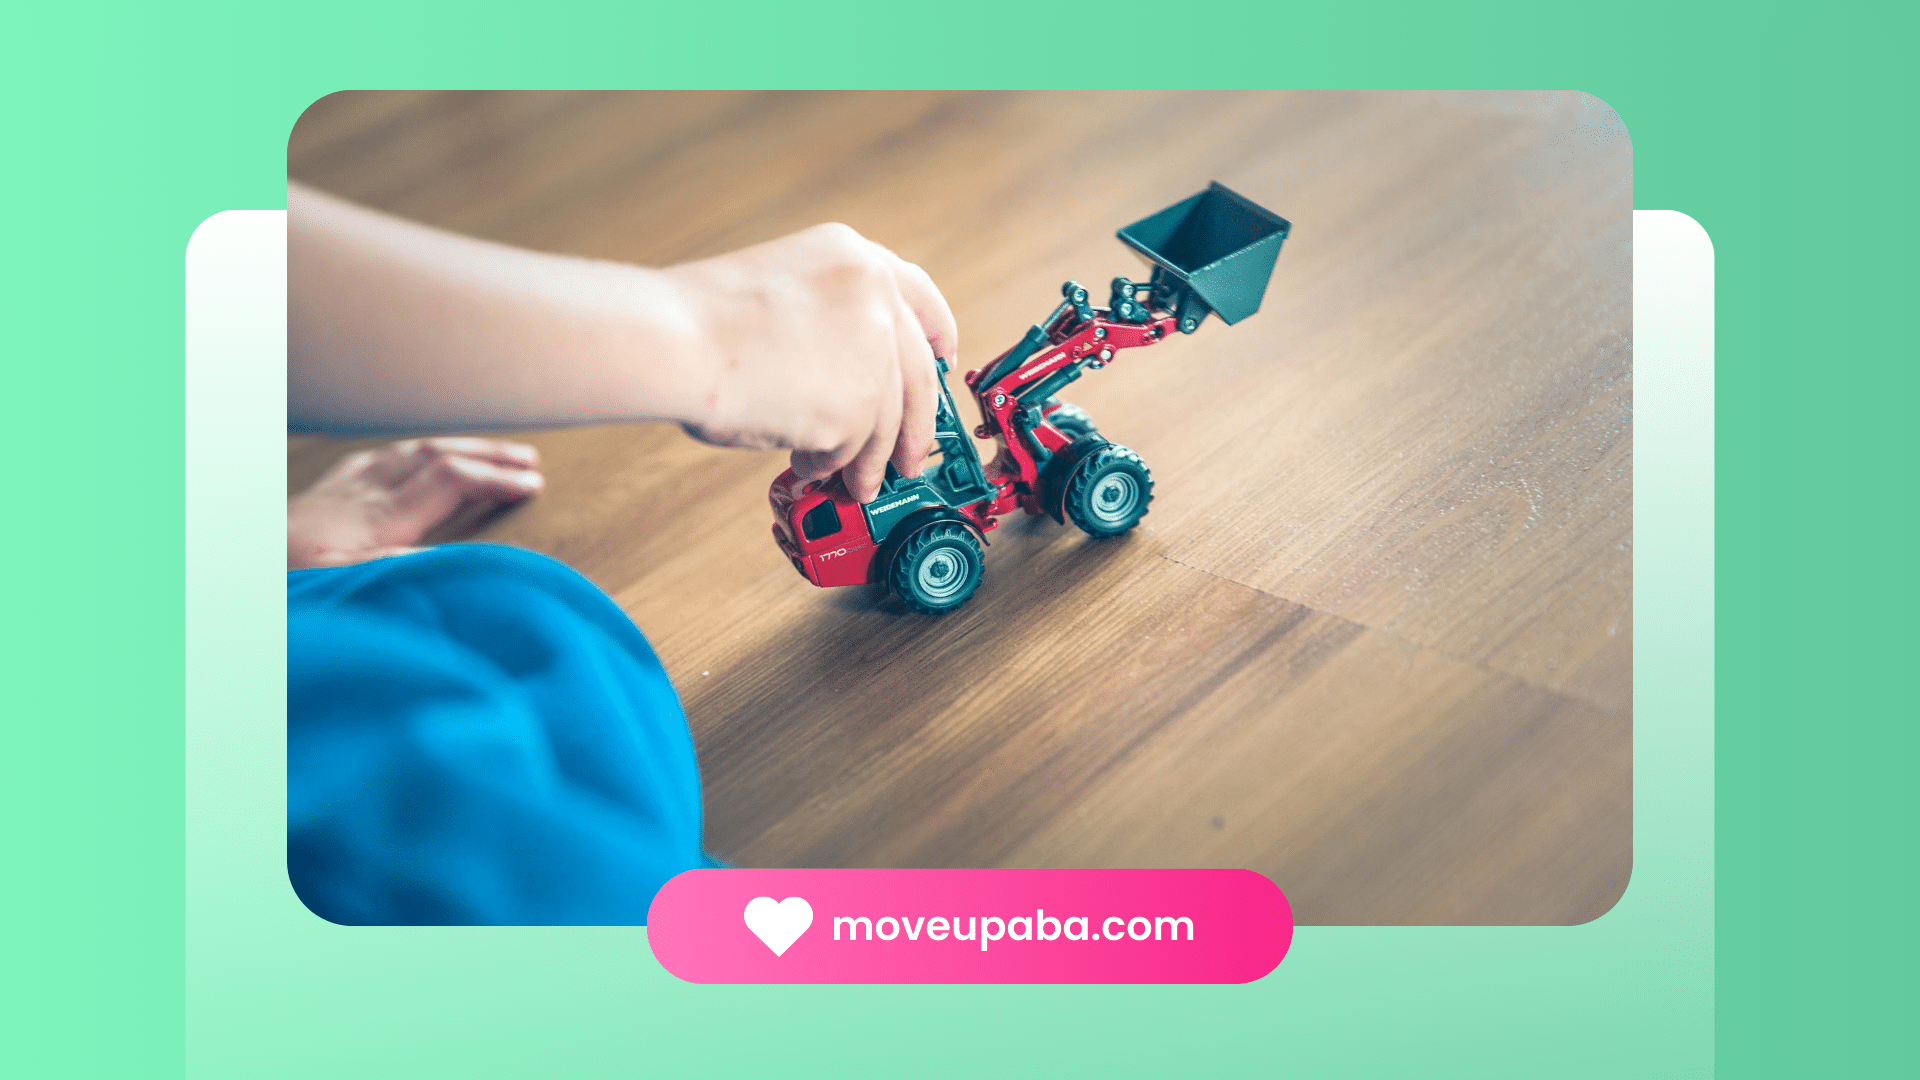 Autistic child playing with a toy tractor on a floor guided by an ABA therapy provider in Maryland.